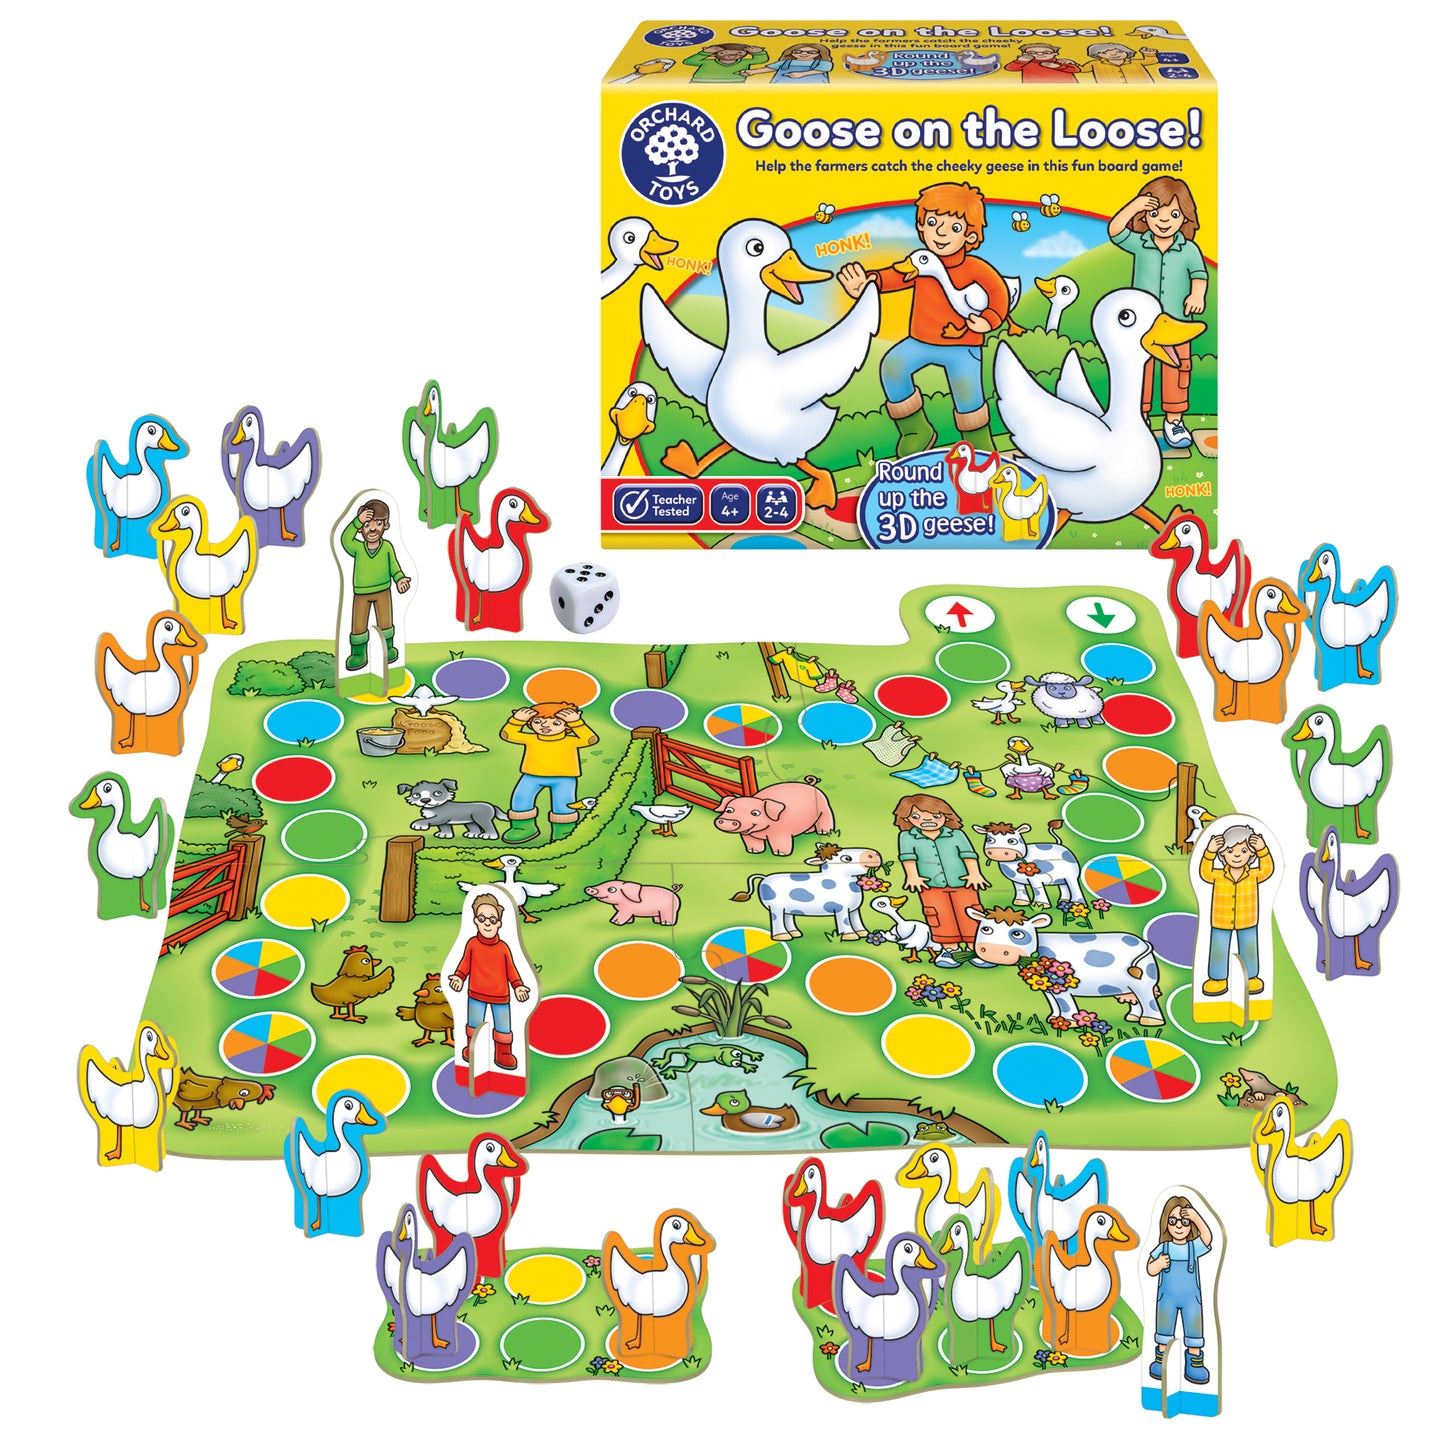 Orchard Toys Goose on the Loose! Game Colour Matching Game